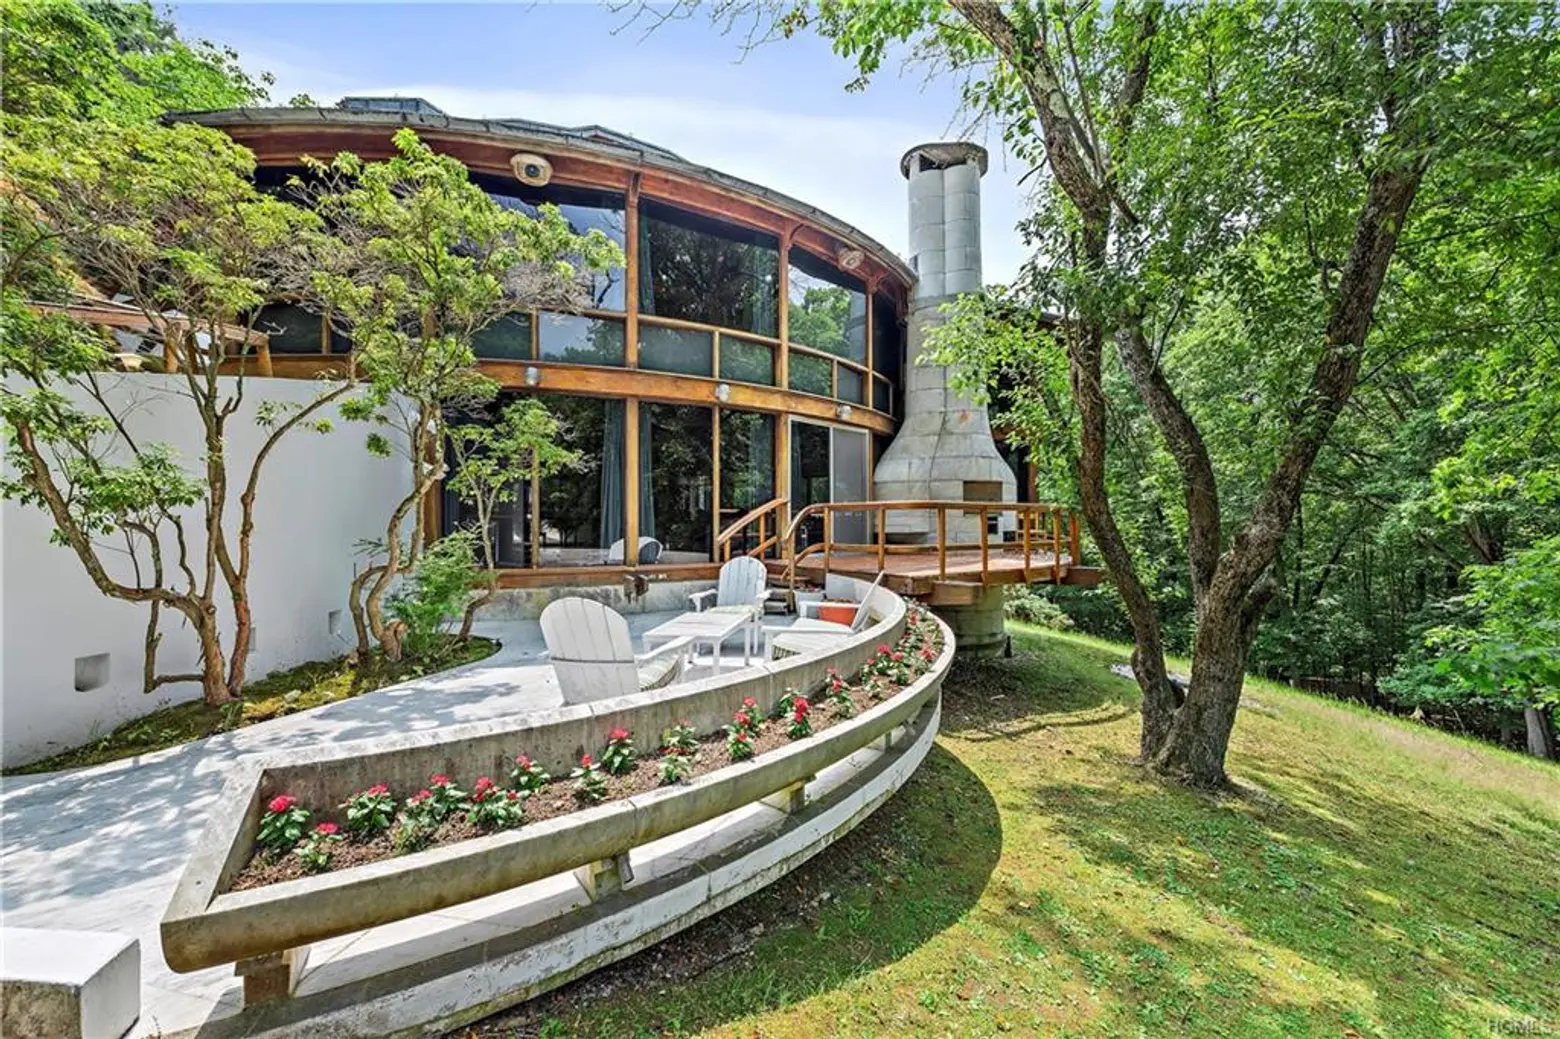 196 Furnace Dock Road, Jackie Gleason, celebrities, cool listings, quirky homes, westchester